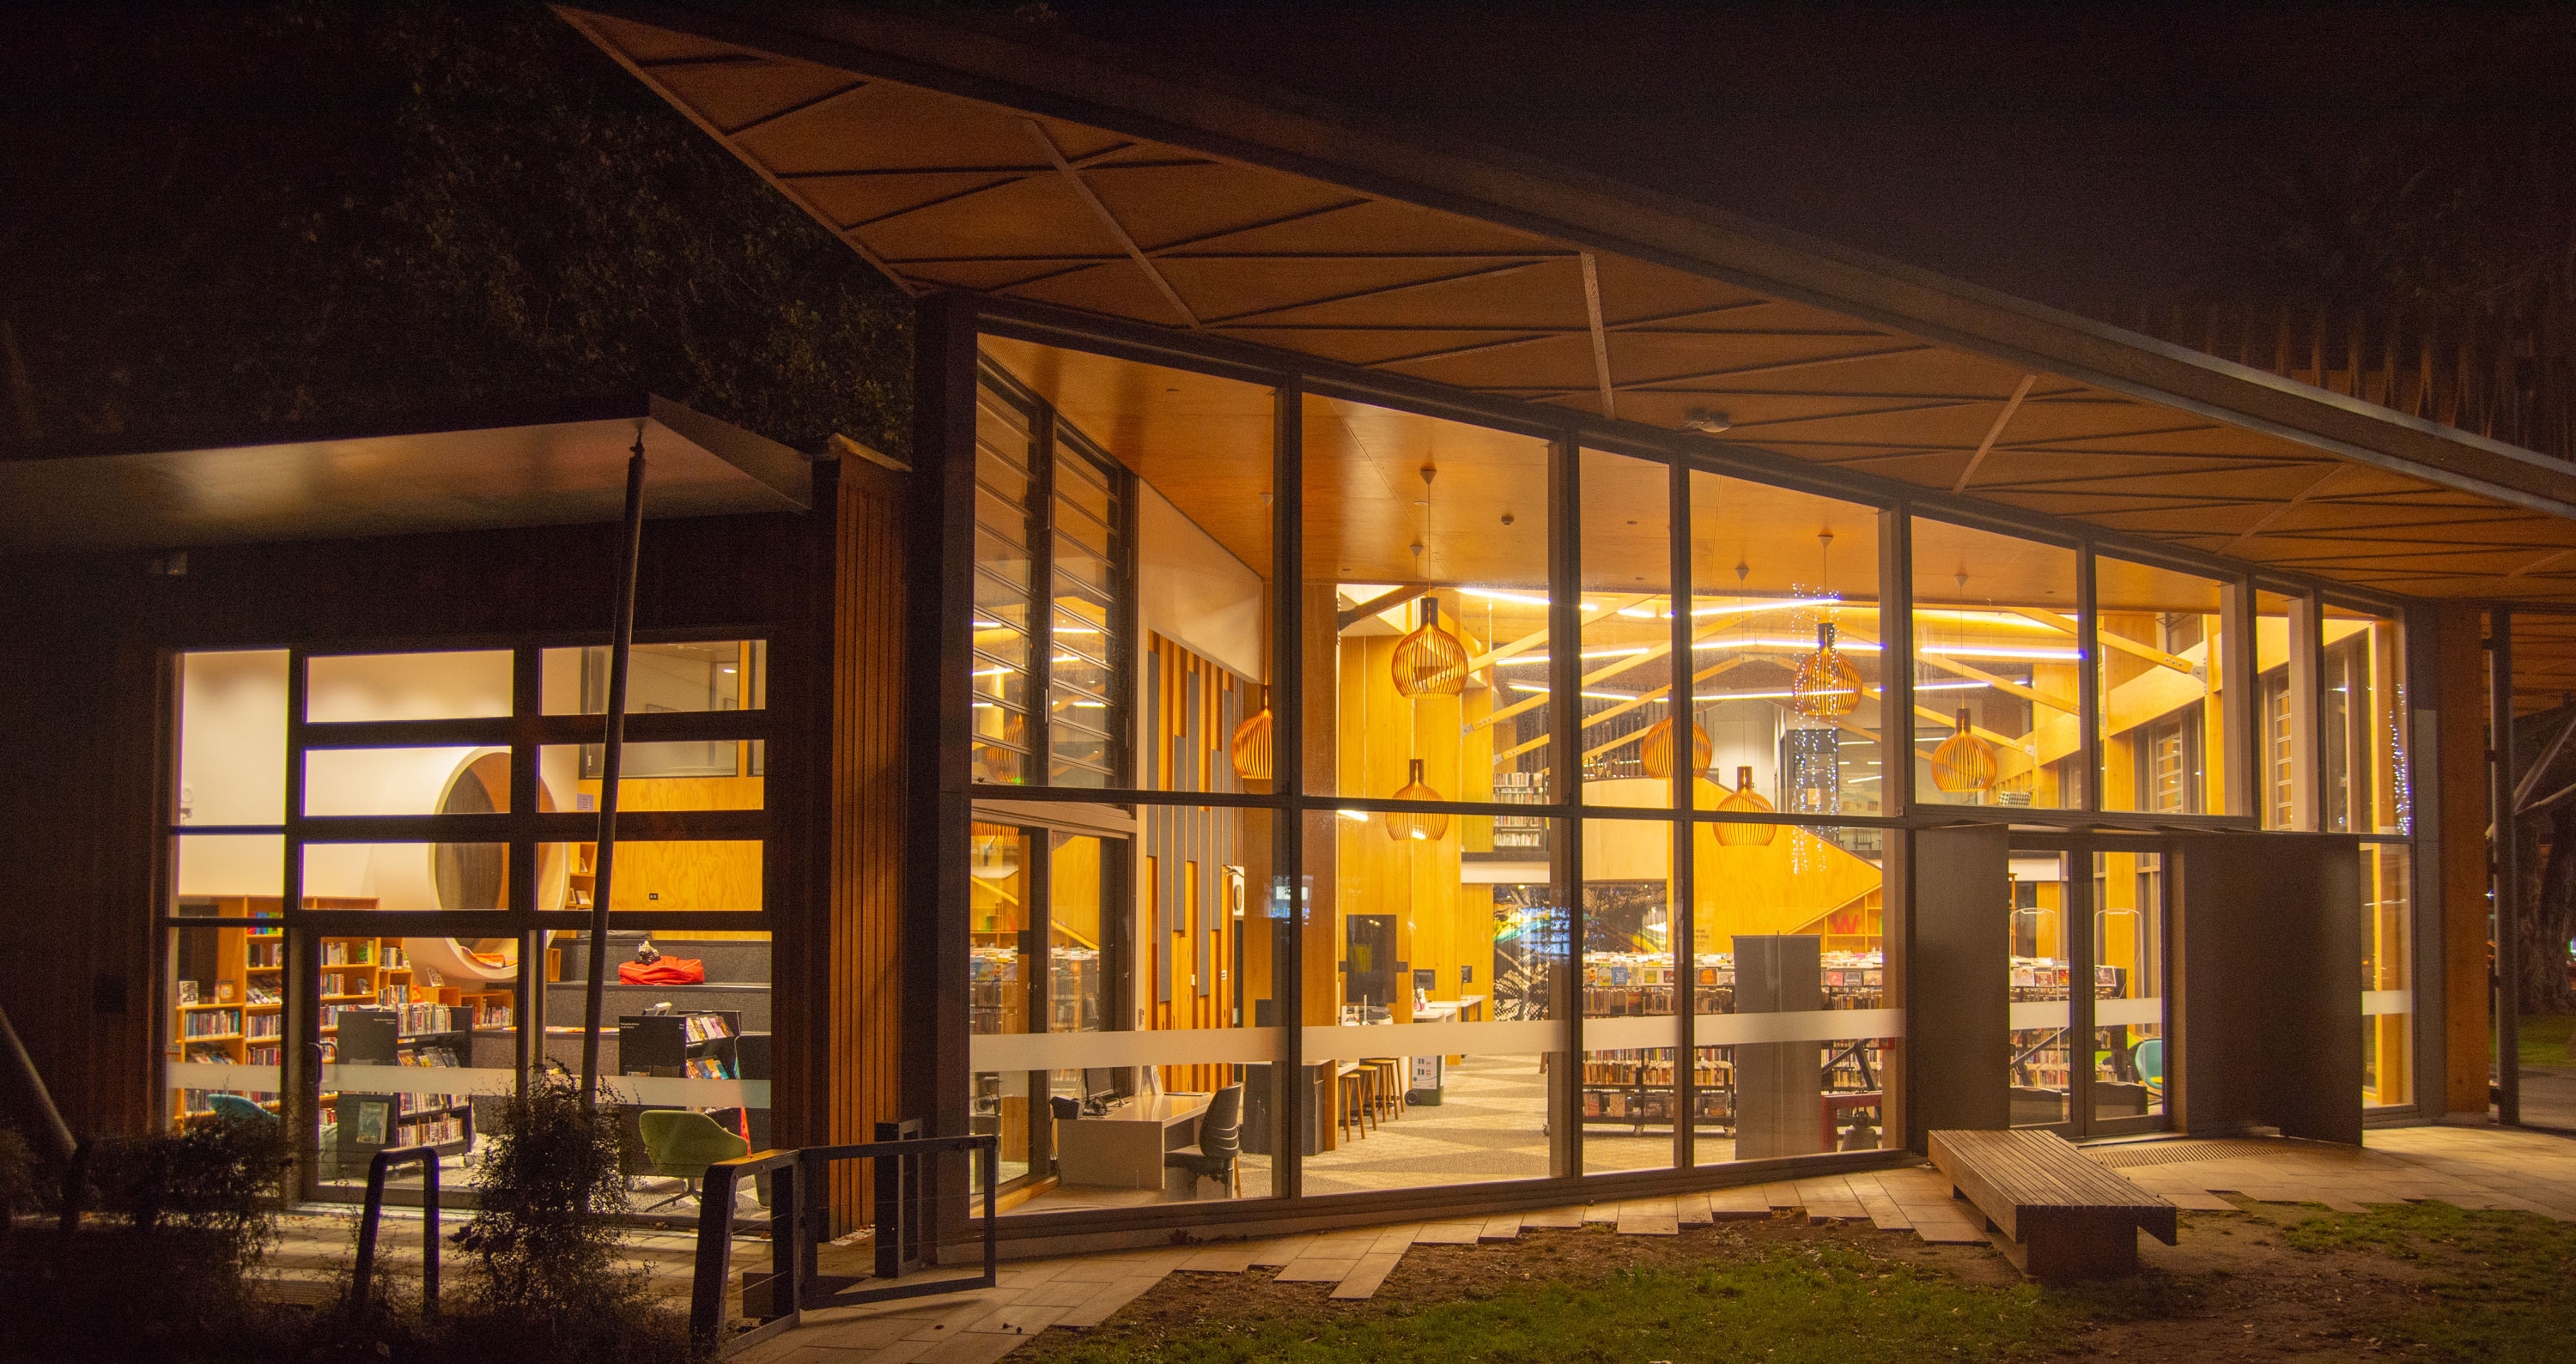 Devonport Library from outside, at night